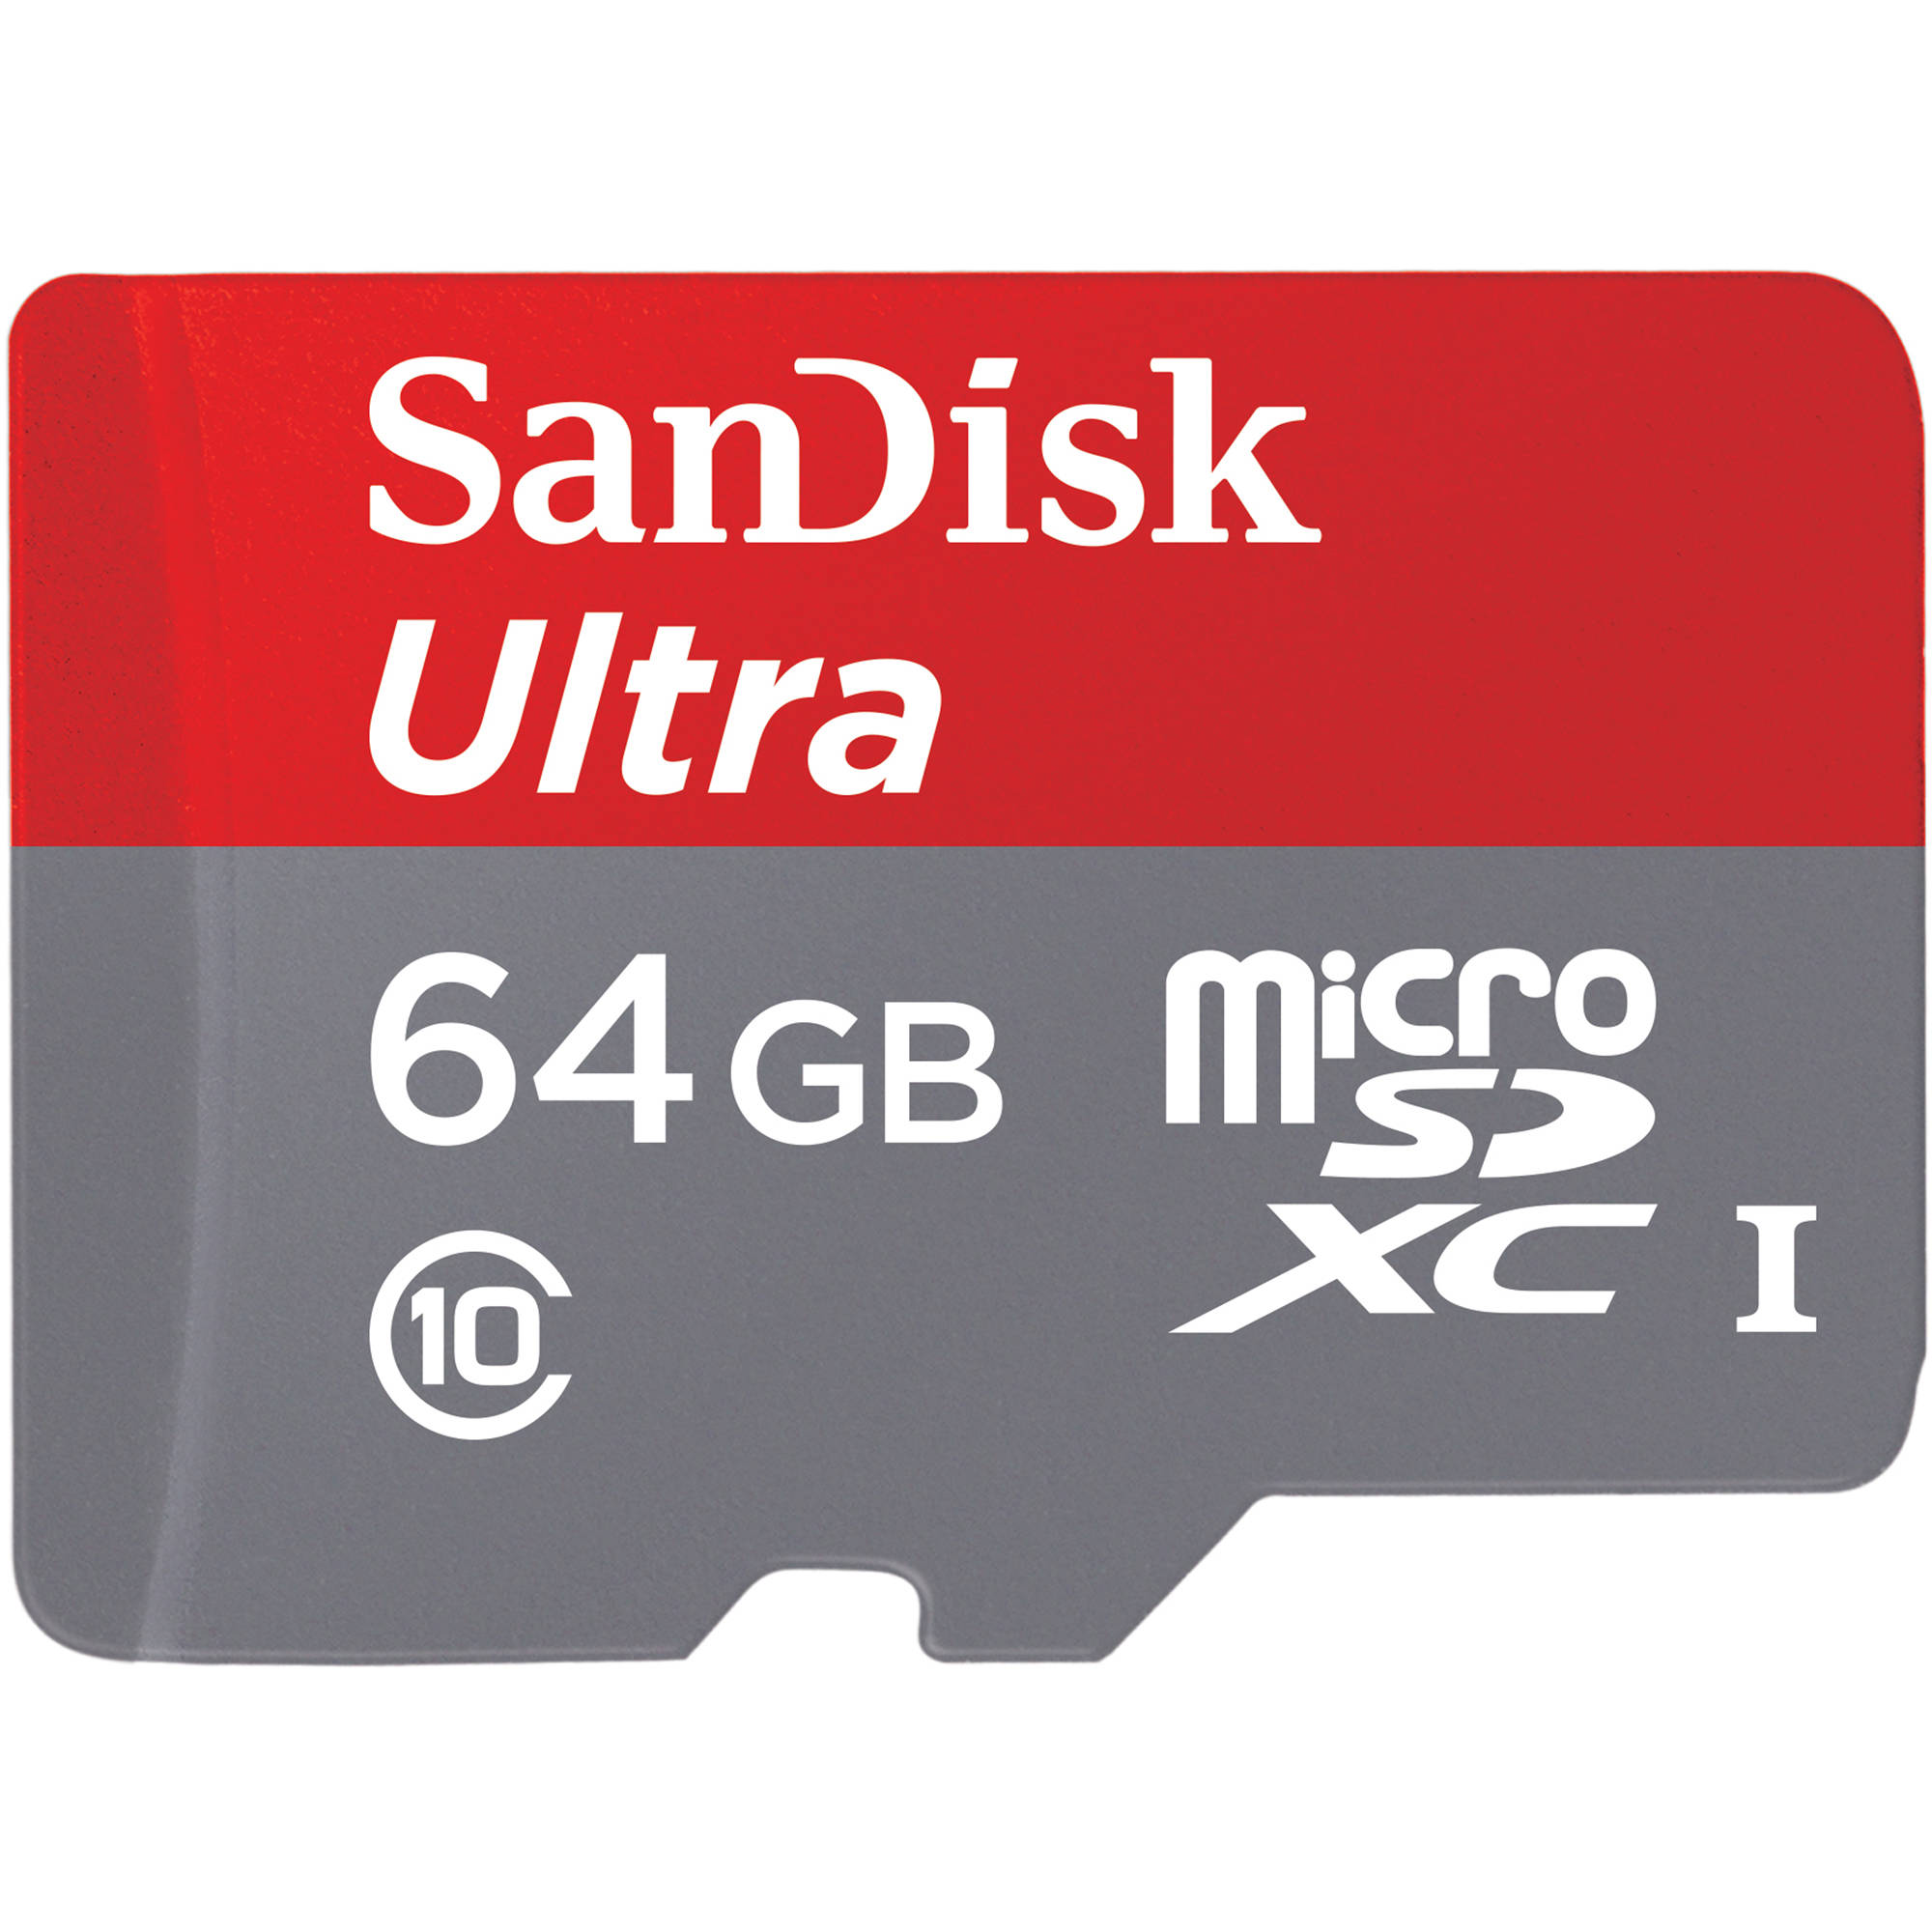 Sandisk ULTRA SD Class 10 Card - 100 MBPS 64GB